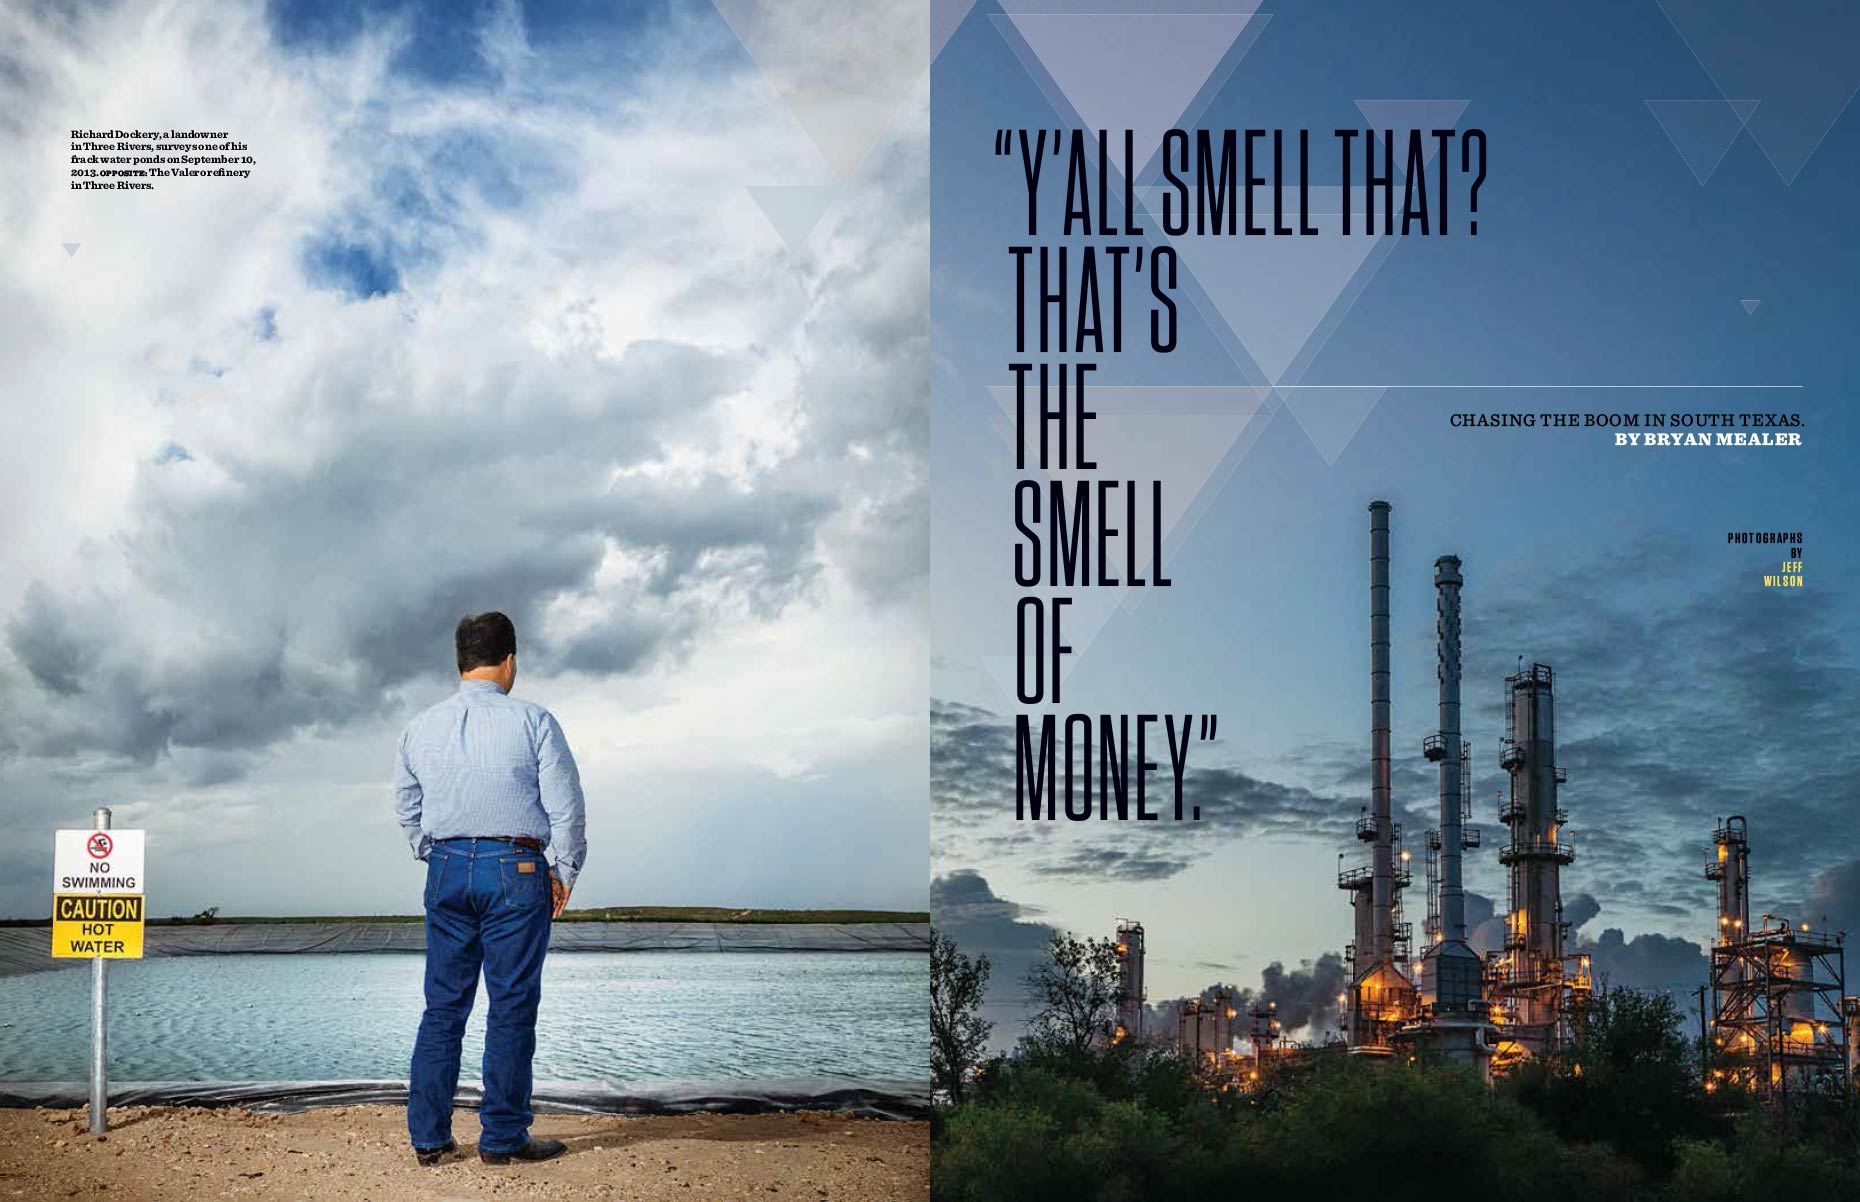 TEXAS MONTHLY, OIL BOOM